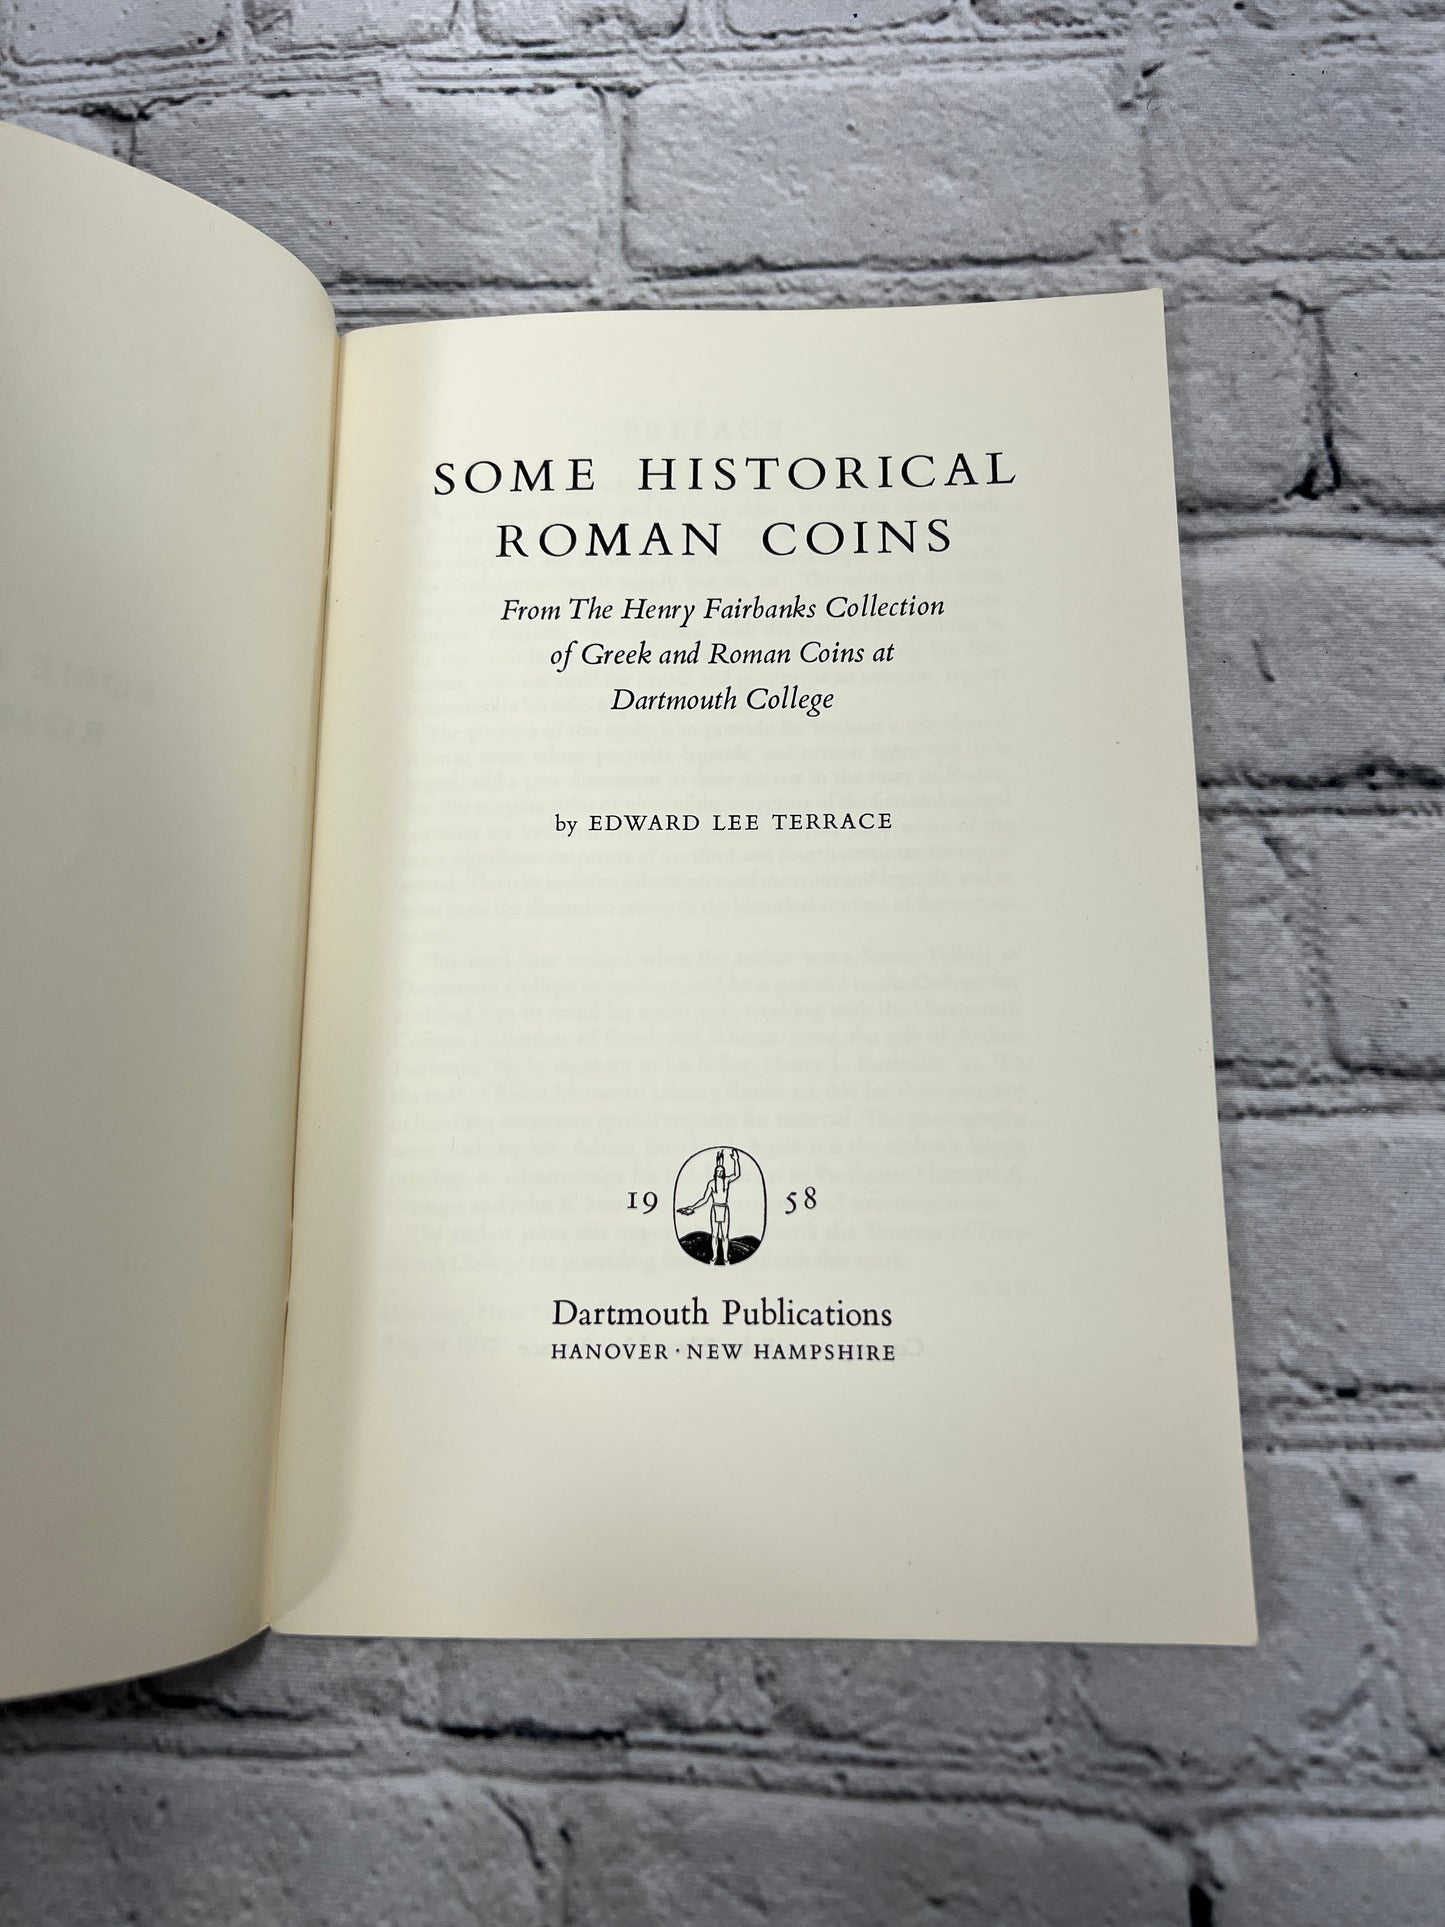 Some Historical Roman Coins By Edward Lee Terrace [1958 · Dartmouth Publication]